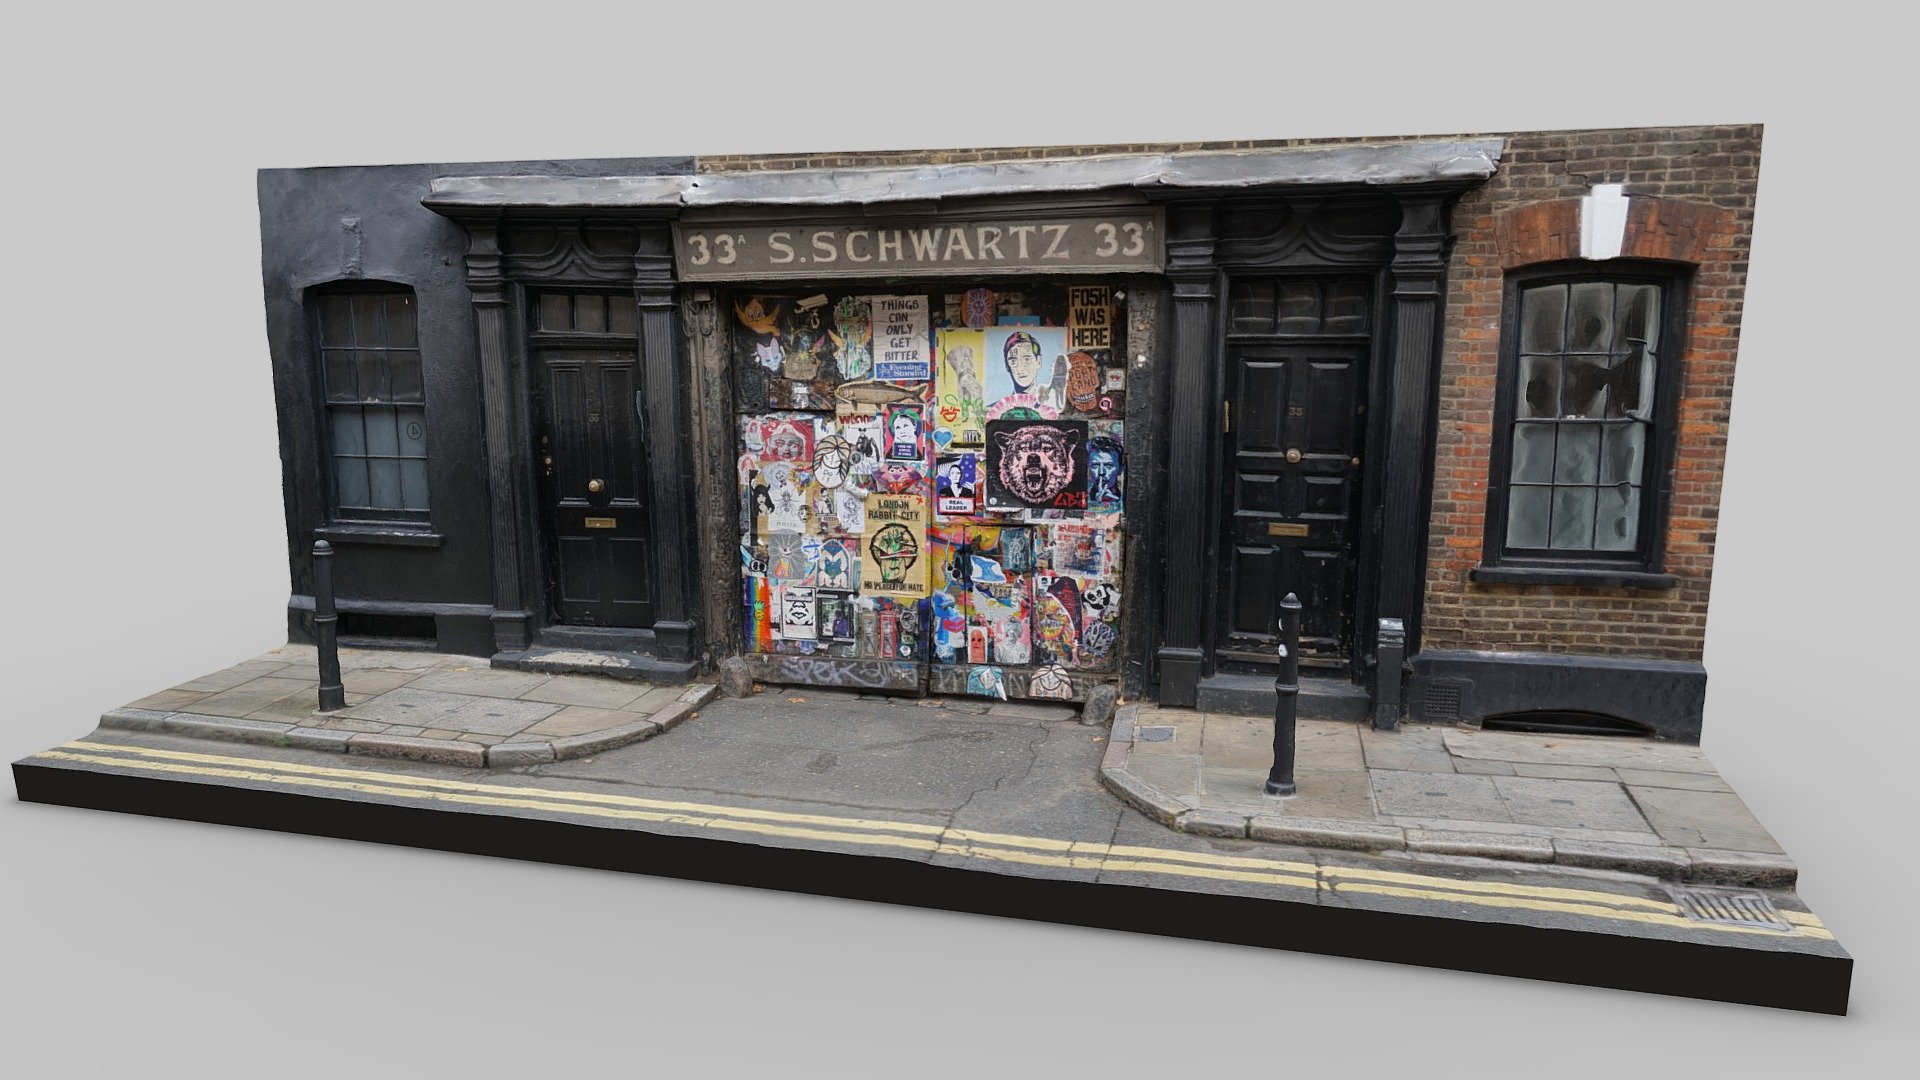 A gate to a yard on Fournier Street, London. Above the gate reads S. Schwartz.

Fournier Steet is a beautiful and well preserved Georgion Street in the heart of London's East End.

Interesting blog post about the gate:
https://www.andrewwhitehead.net/blog/s-schwartz-of-spitalfields

https://en.wikipedia.org/wiki/Fournier_Street

118 photos taken in September 2019 with a Sony a6000 and processed in Agisoft Metashape 3d model